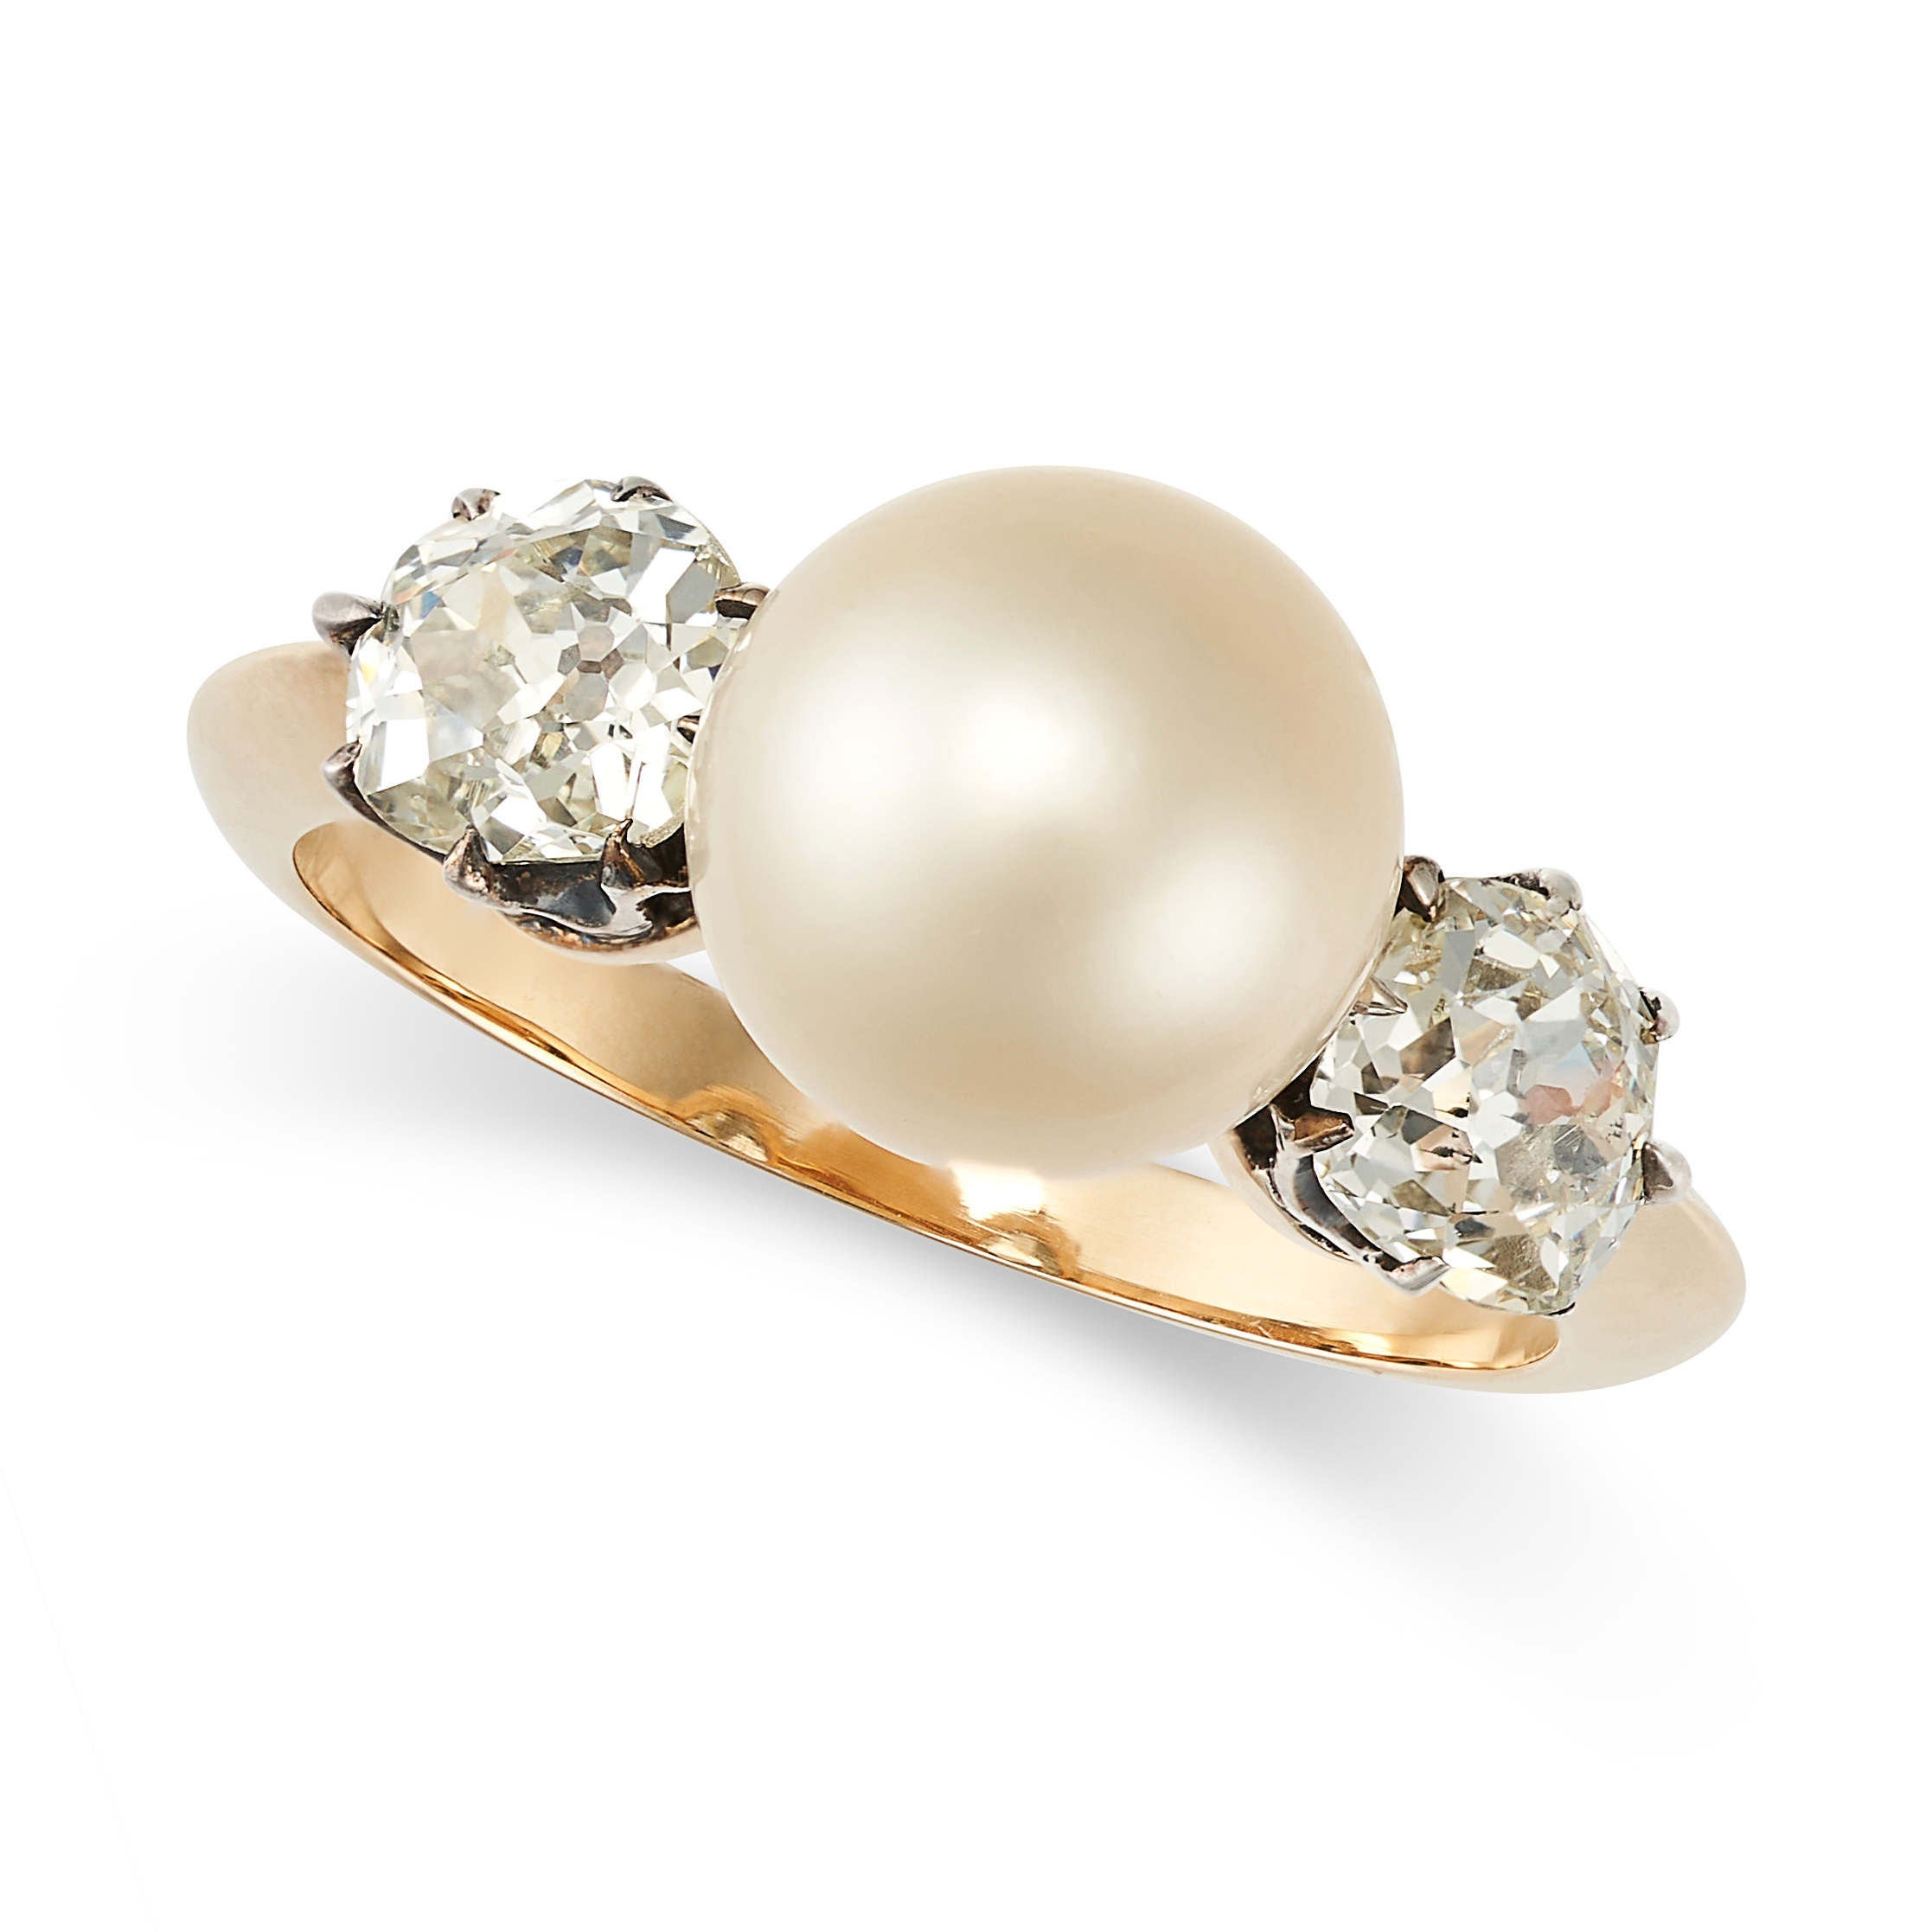 A NATURAL PEARL AND DIAMOND RING in yellow gold, set with a natural pearl of 5.15 carats between ...